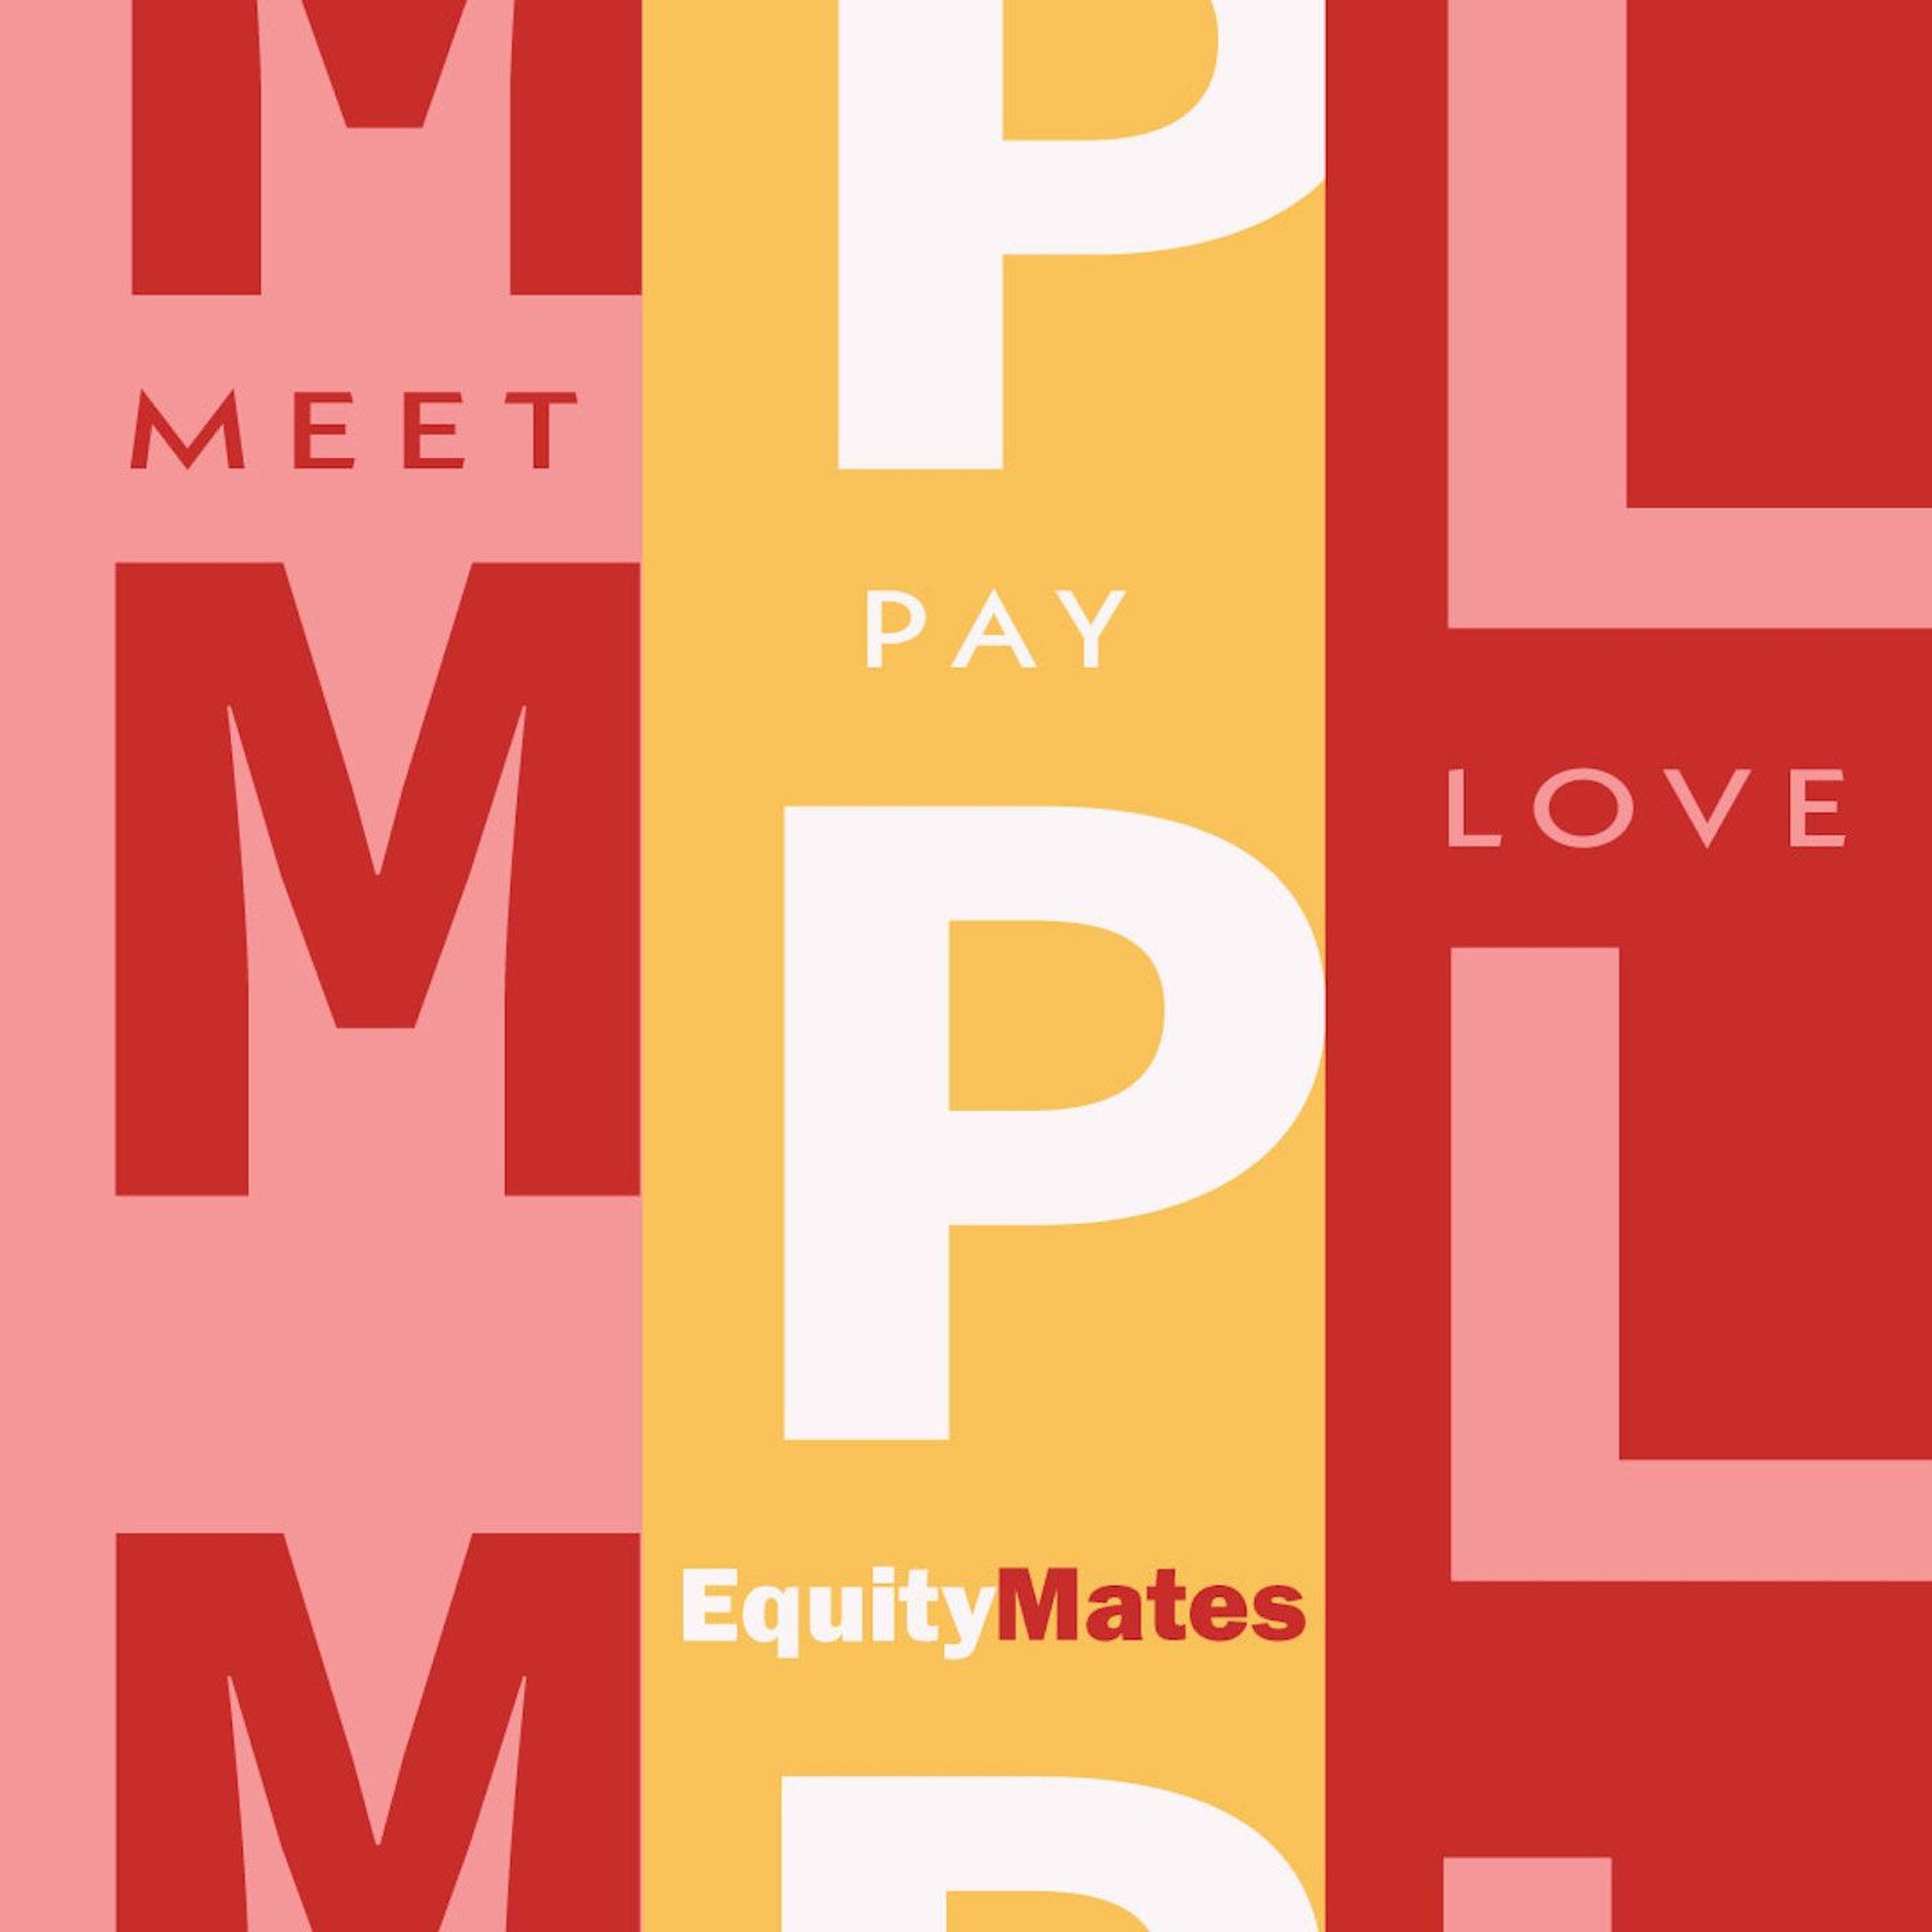 What Is Meet Pay Love?